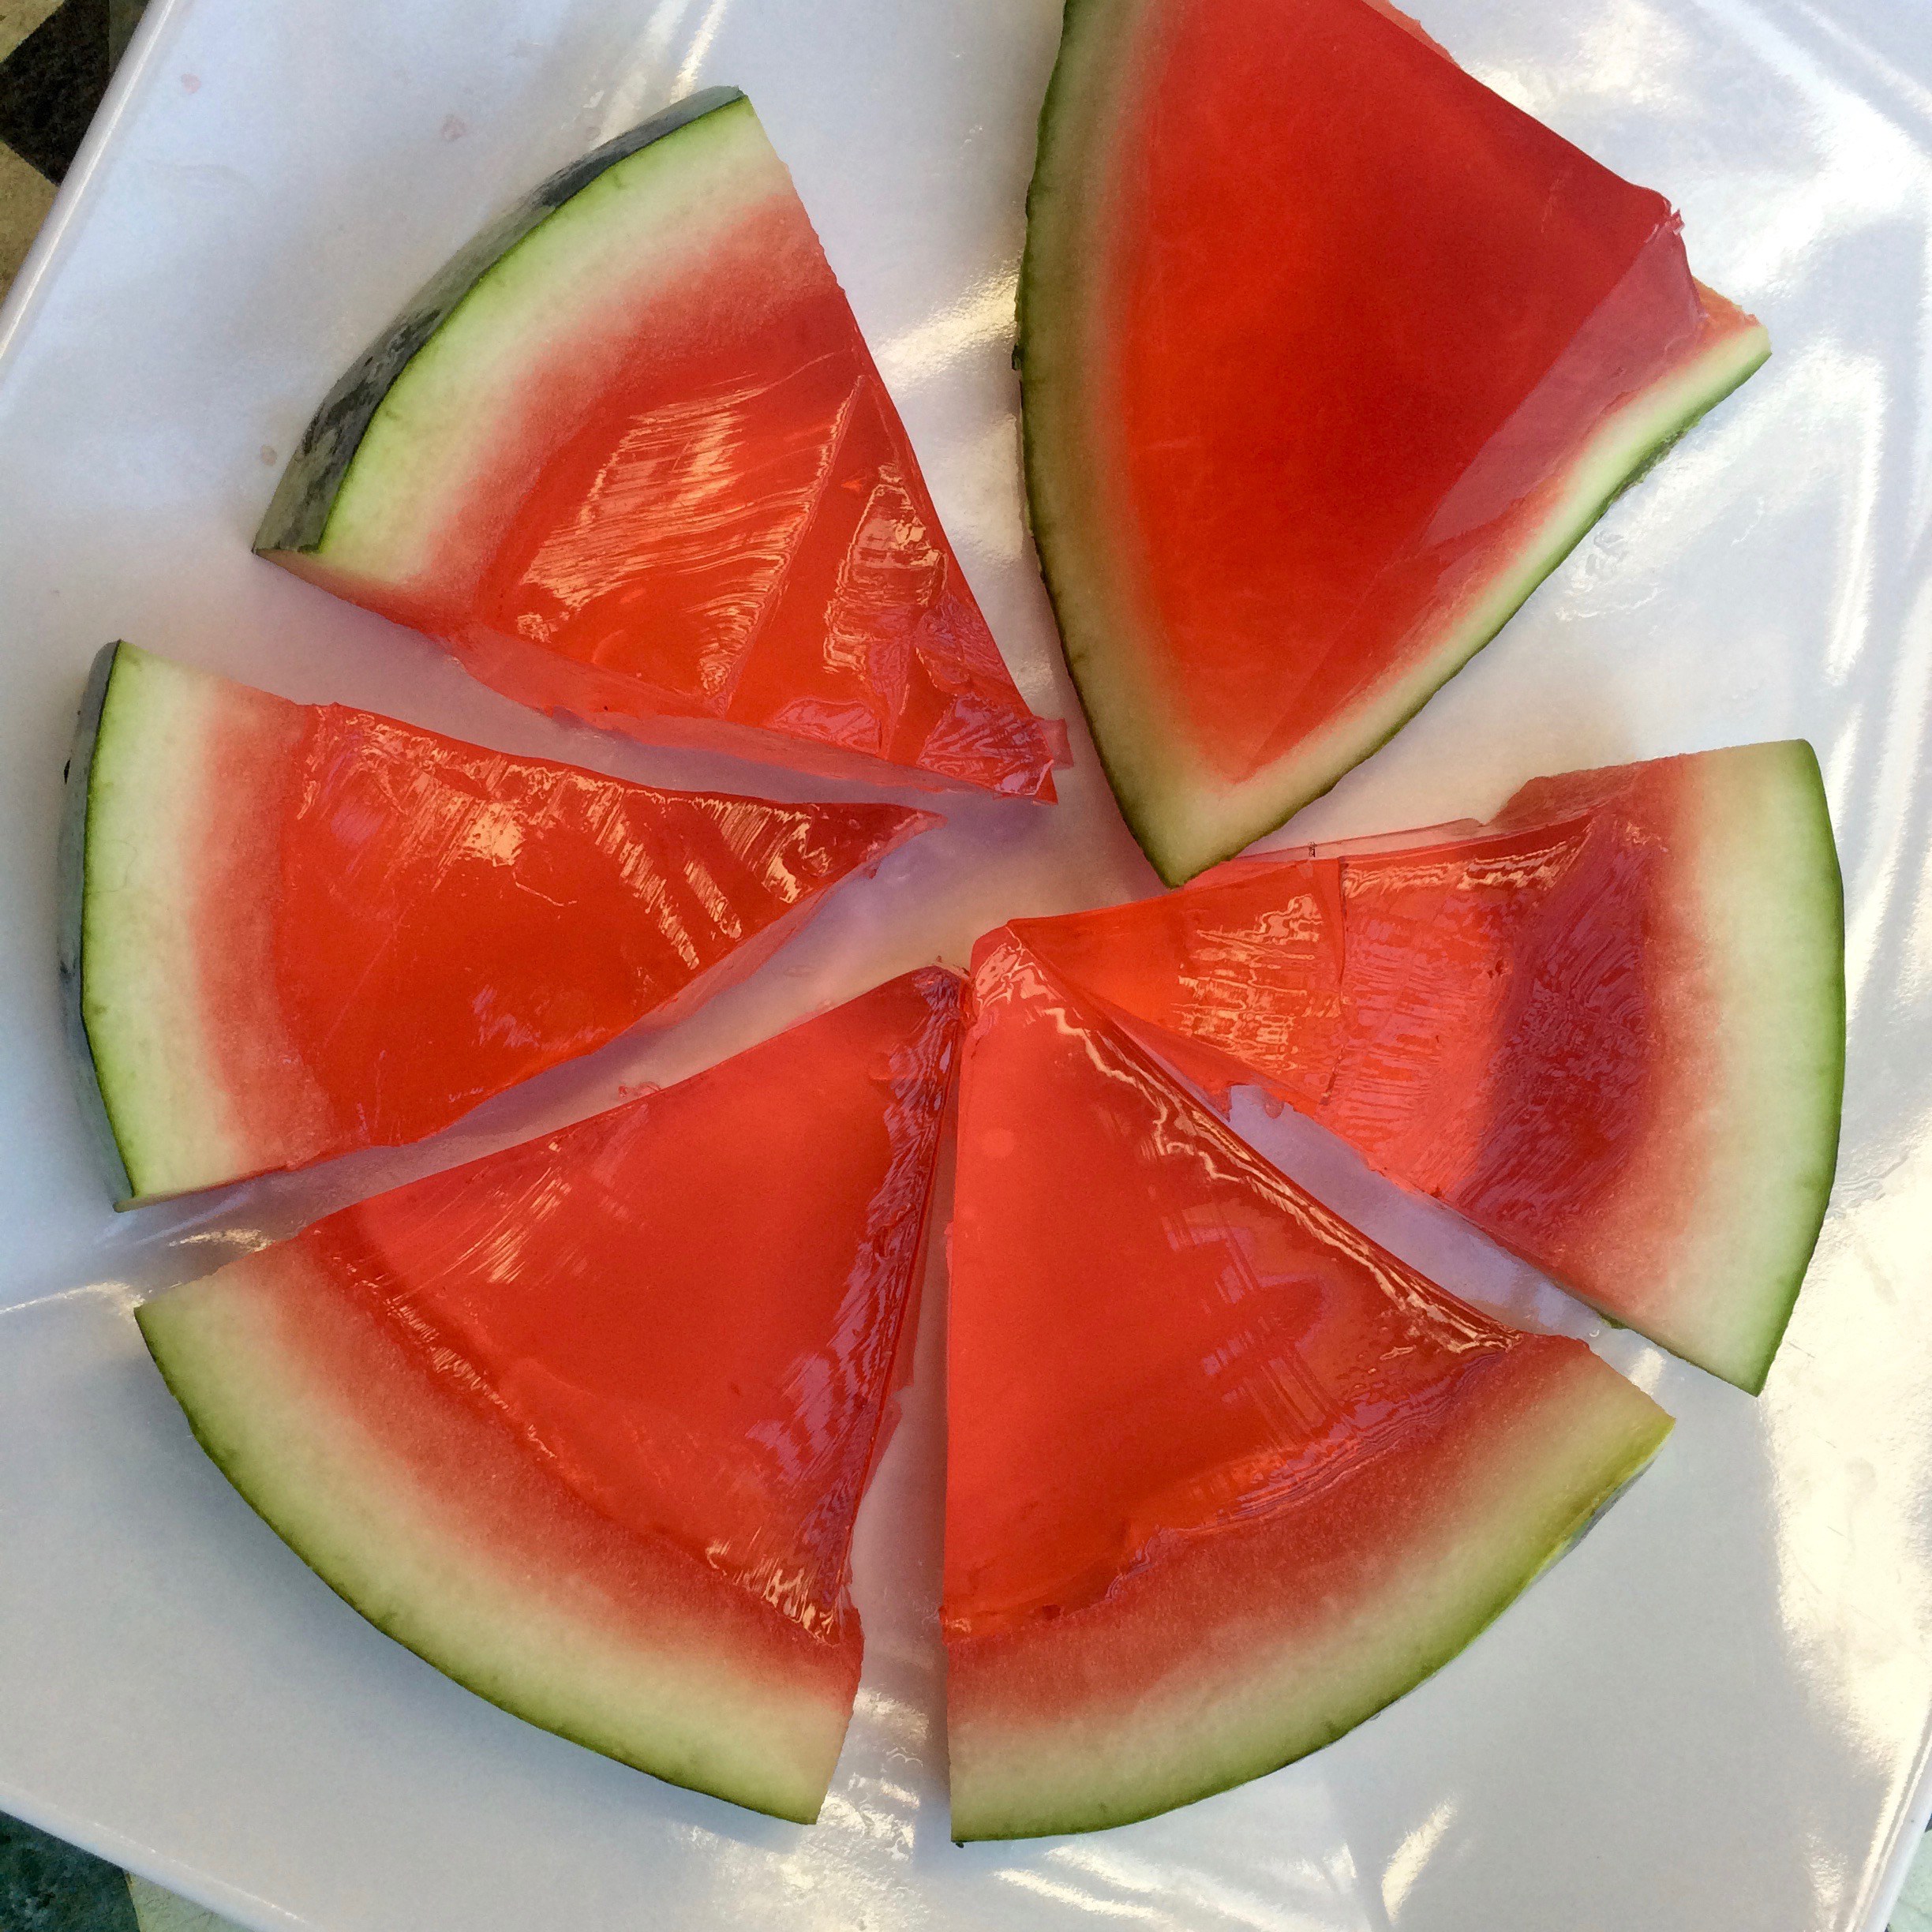 Sliced Watermelon Jello Shots - Positively Stacey